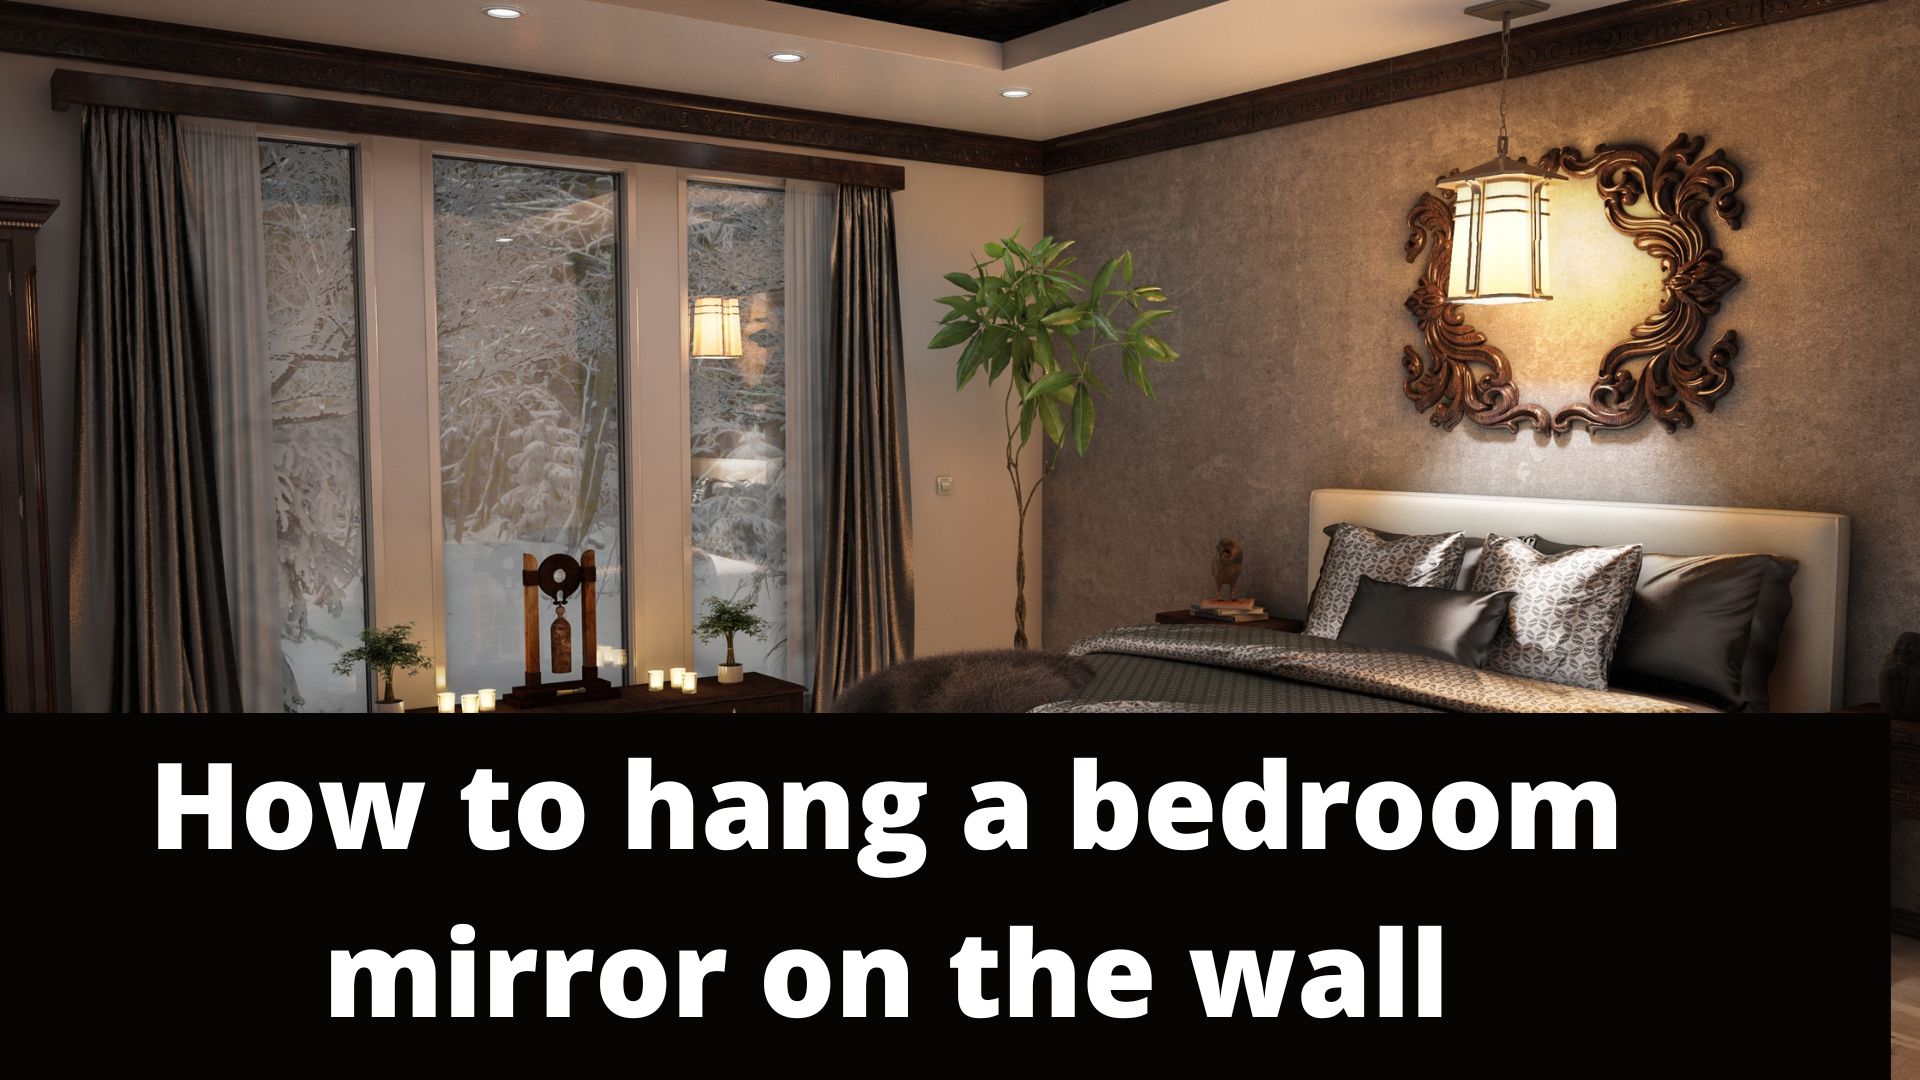 How to hang a bedroom mirror on the wall